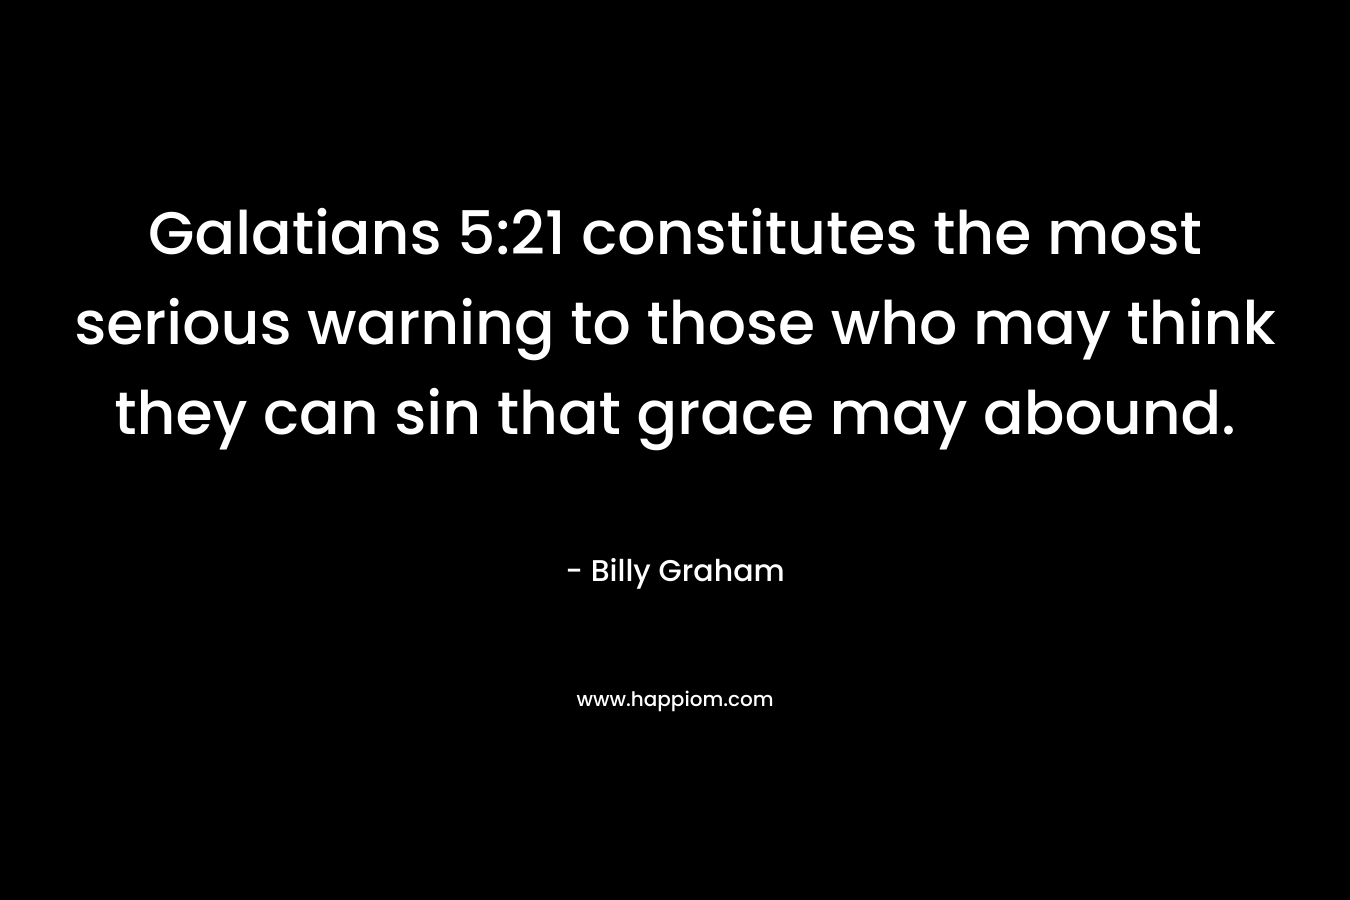 Galatians 5:21 constitutes the most serious warning to those who may think they can sin that grace may abound. – Billy Graham